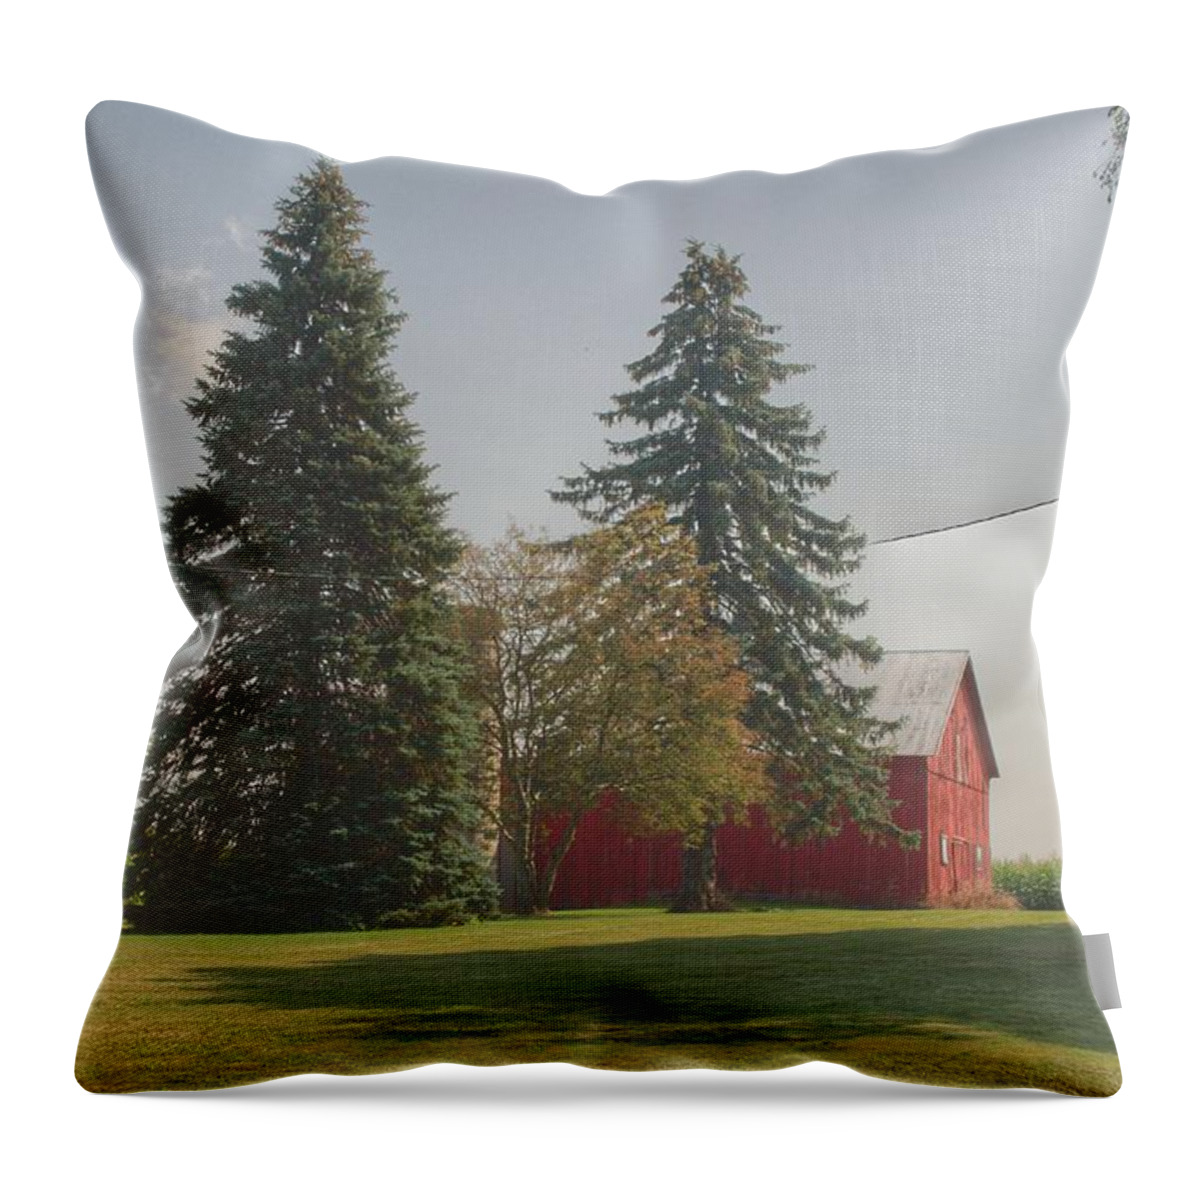 Barn Throw Pillow featuring the photograph 0045 - Small Red Barn Beneath the Pines by Sheryl L Sutter